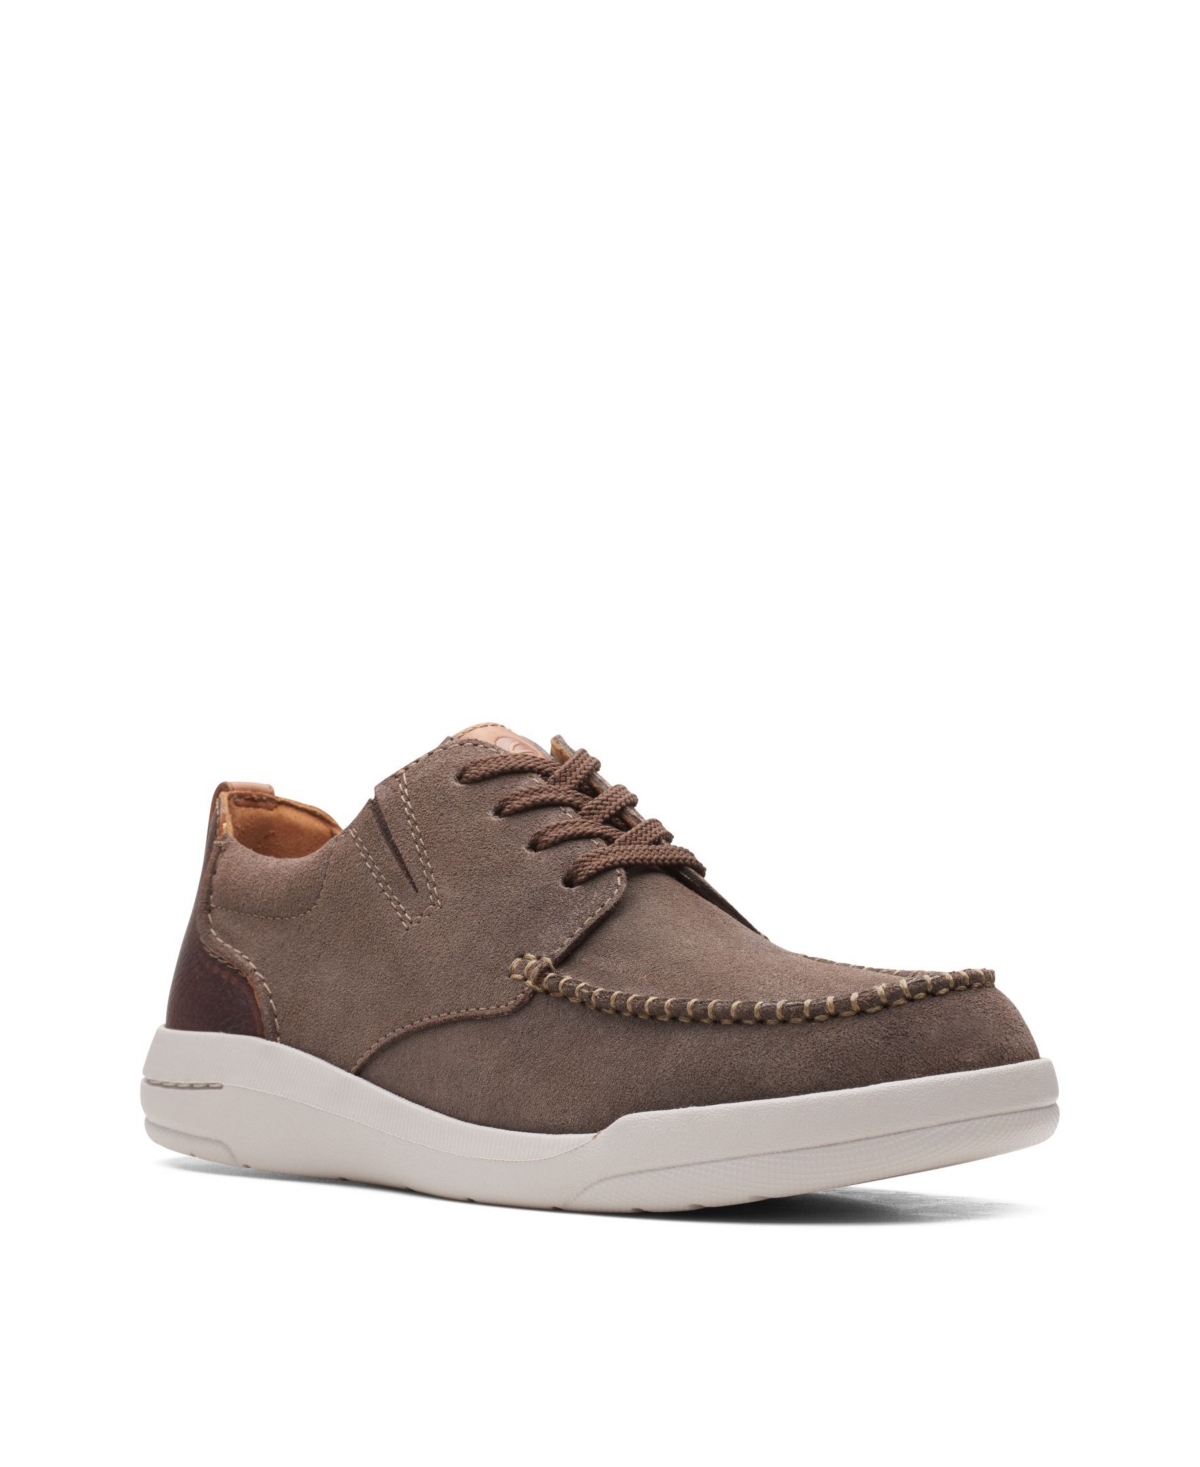 Men's Driftway Low Shoes - Taupe Suede